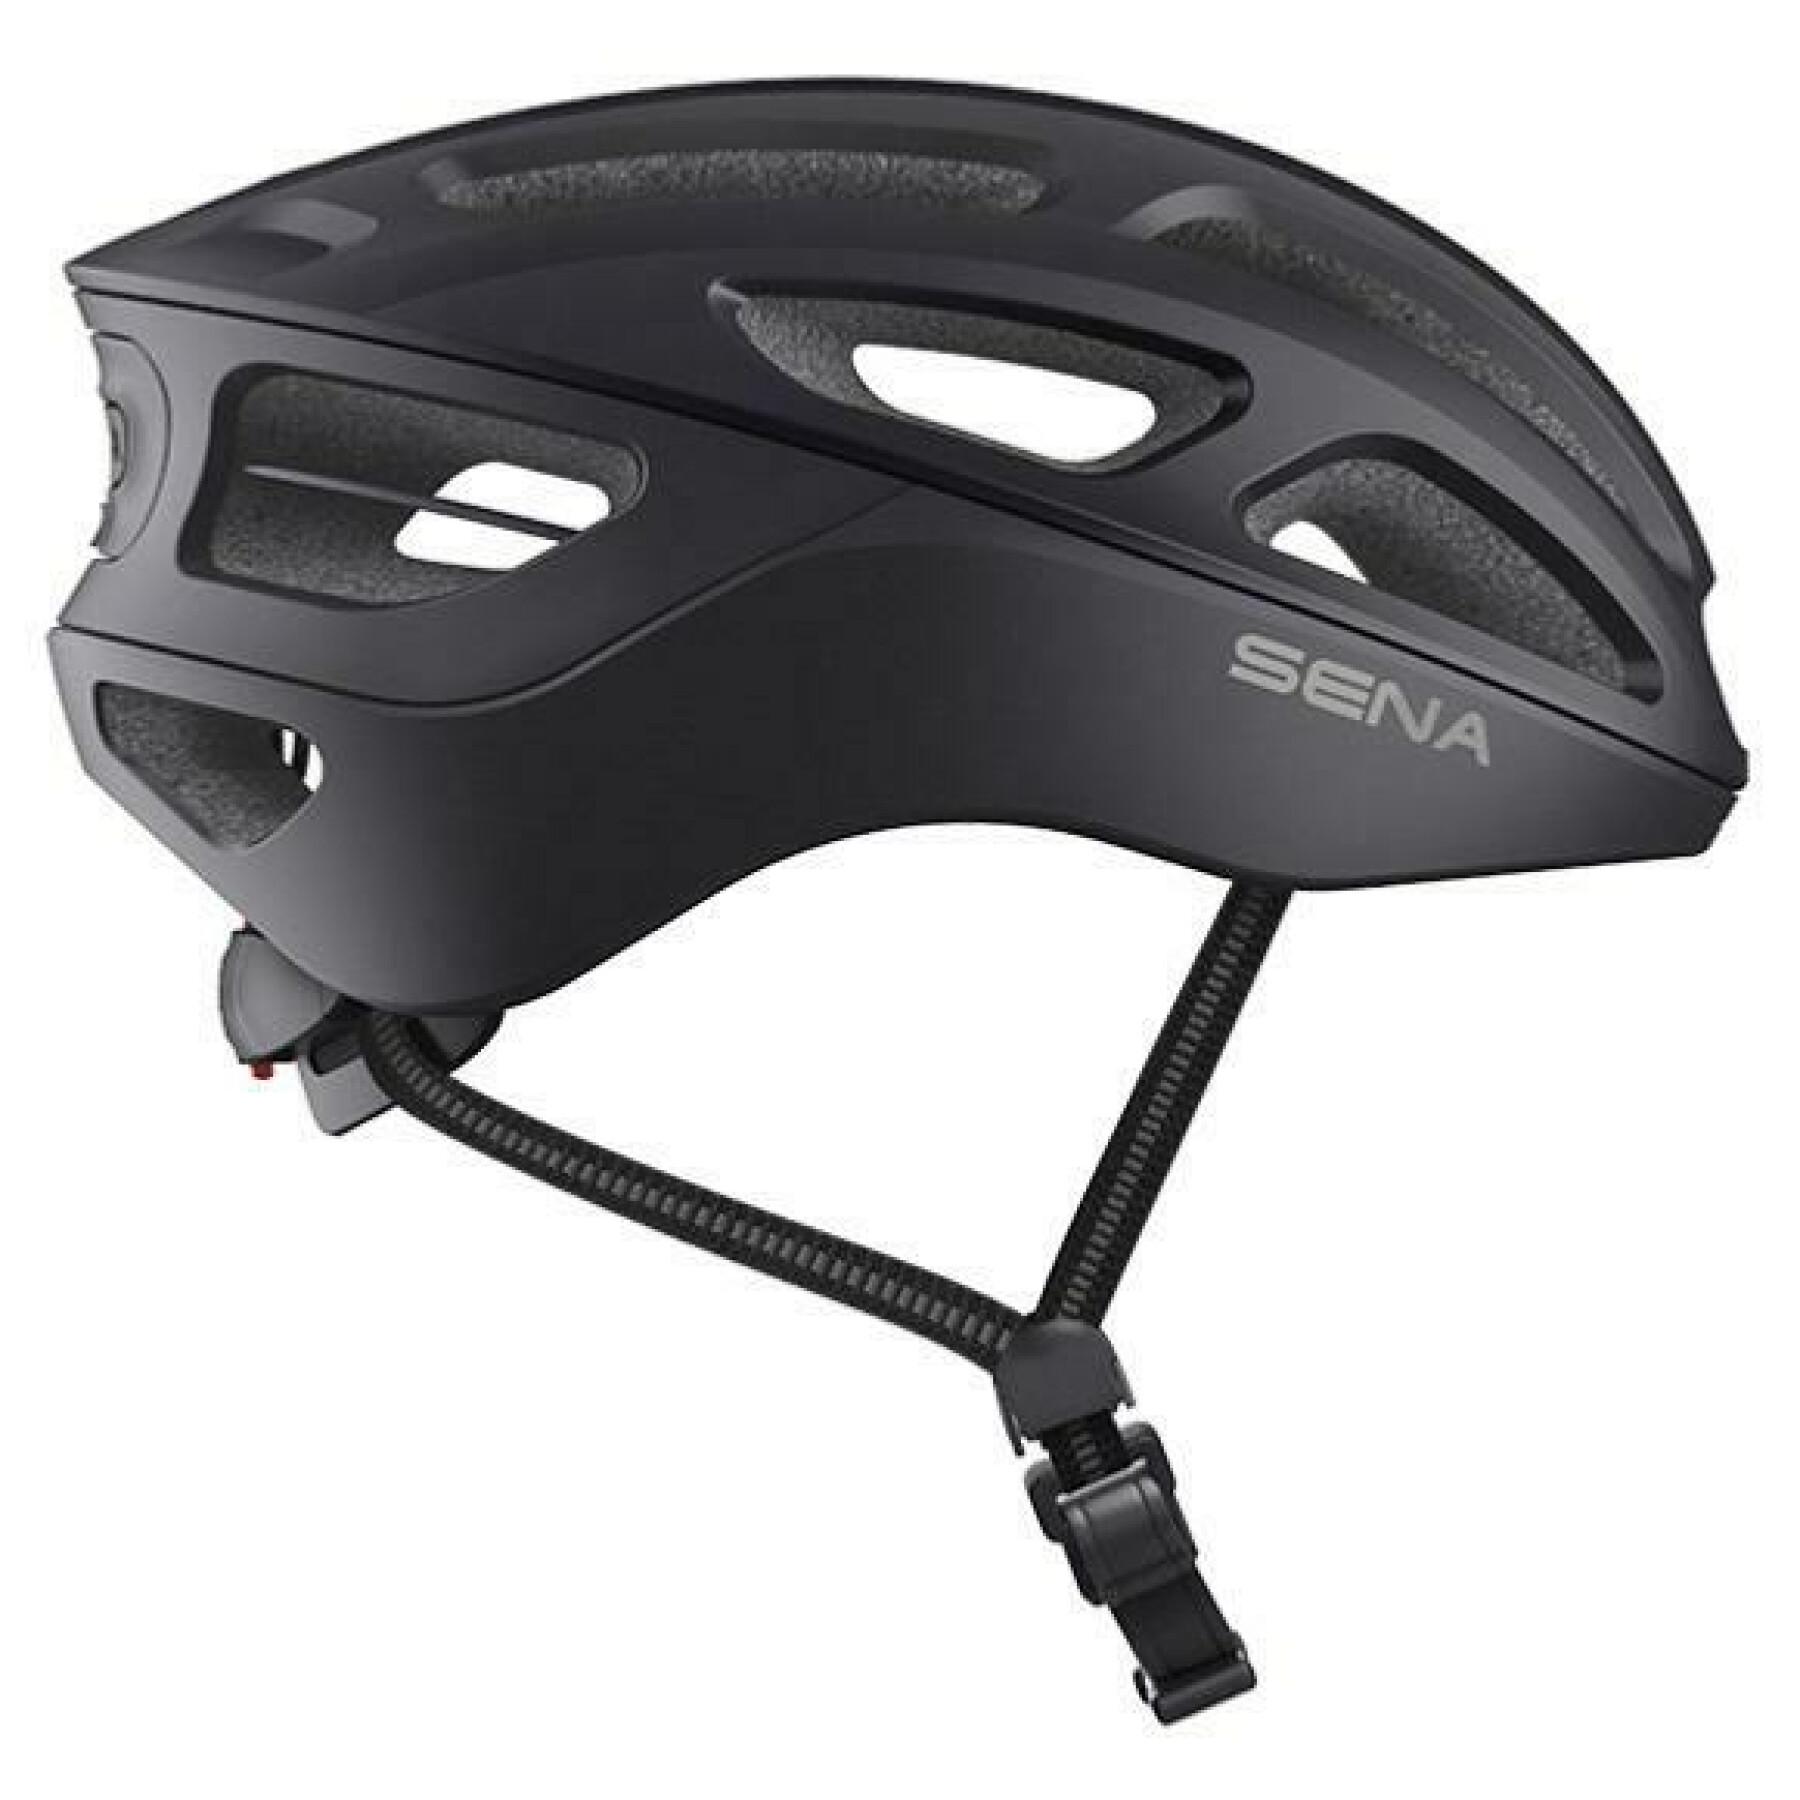 Connected bike helmet Sena R1 with microphone and speaker